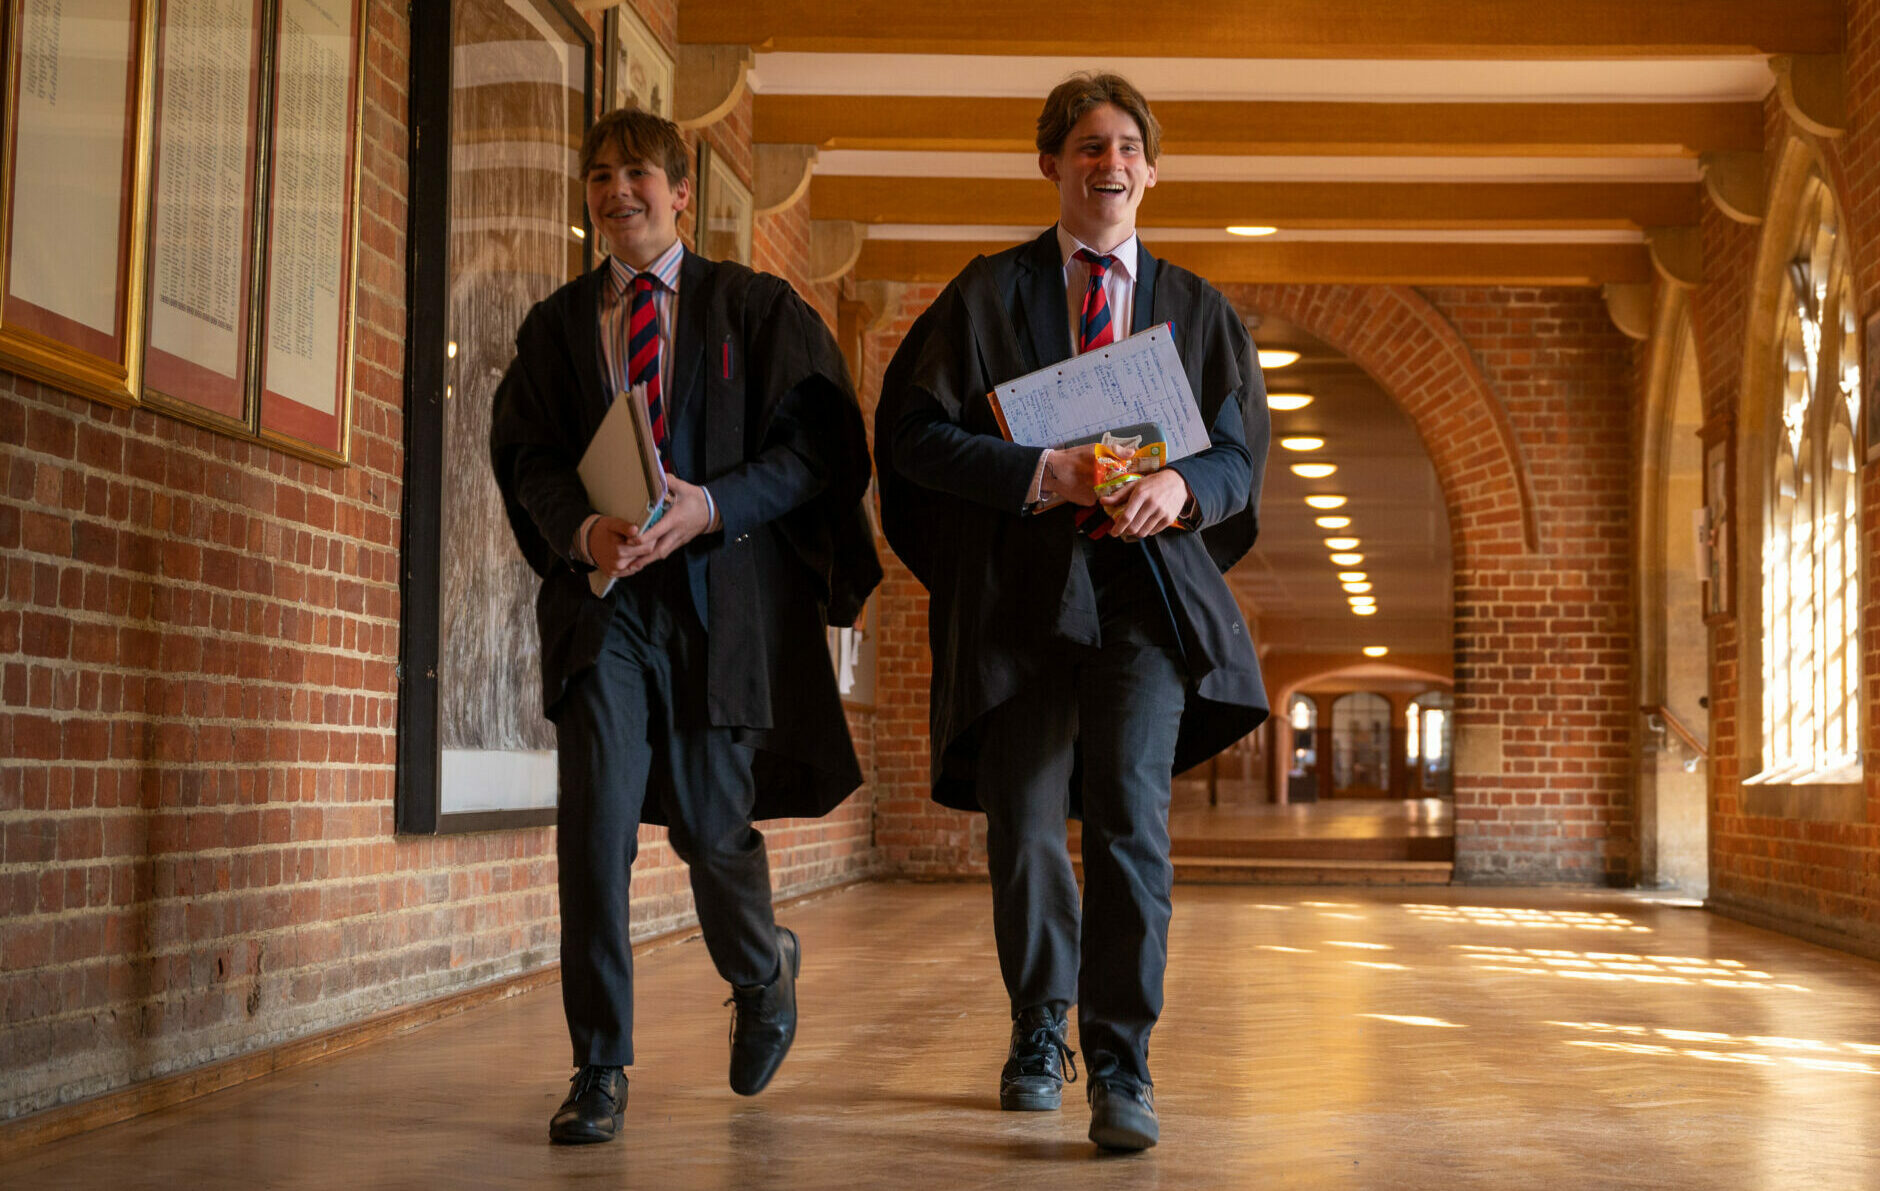 Boys walking down covered passage at Radley College